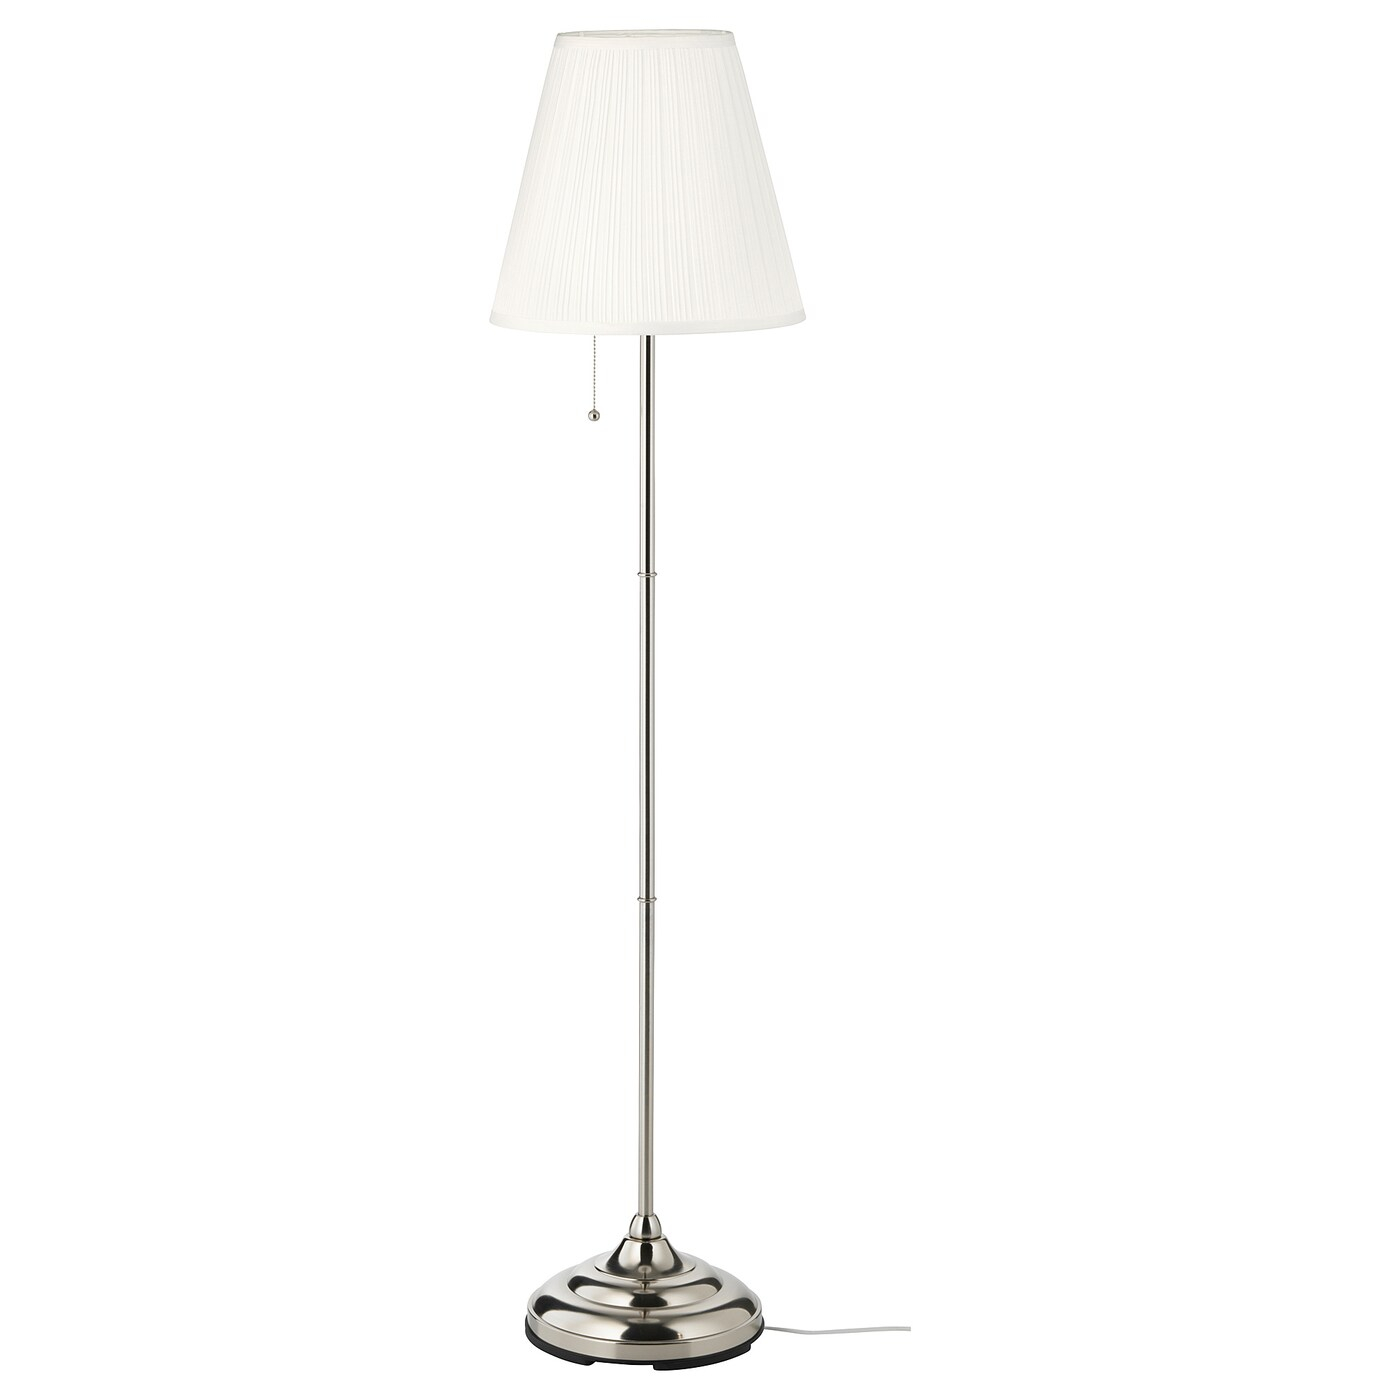 Rstid Floor Lamp Nickel Plated White intended for proportions 1400 X 1400